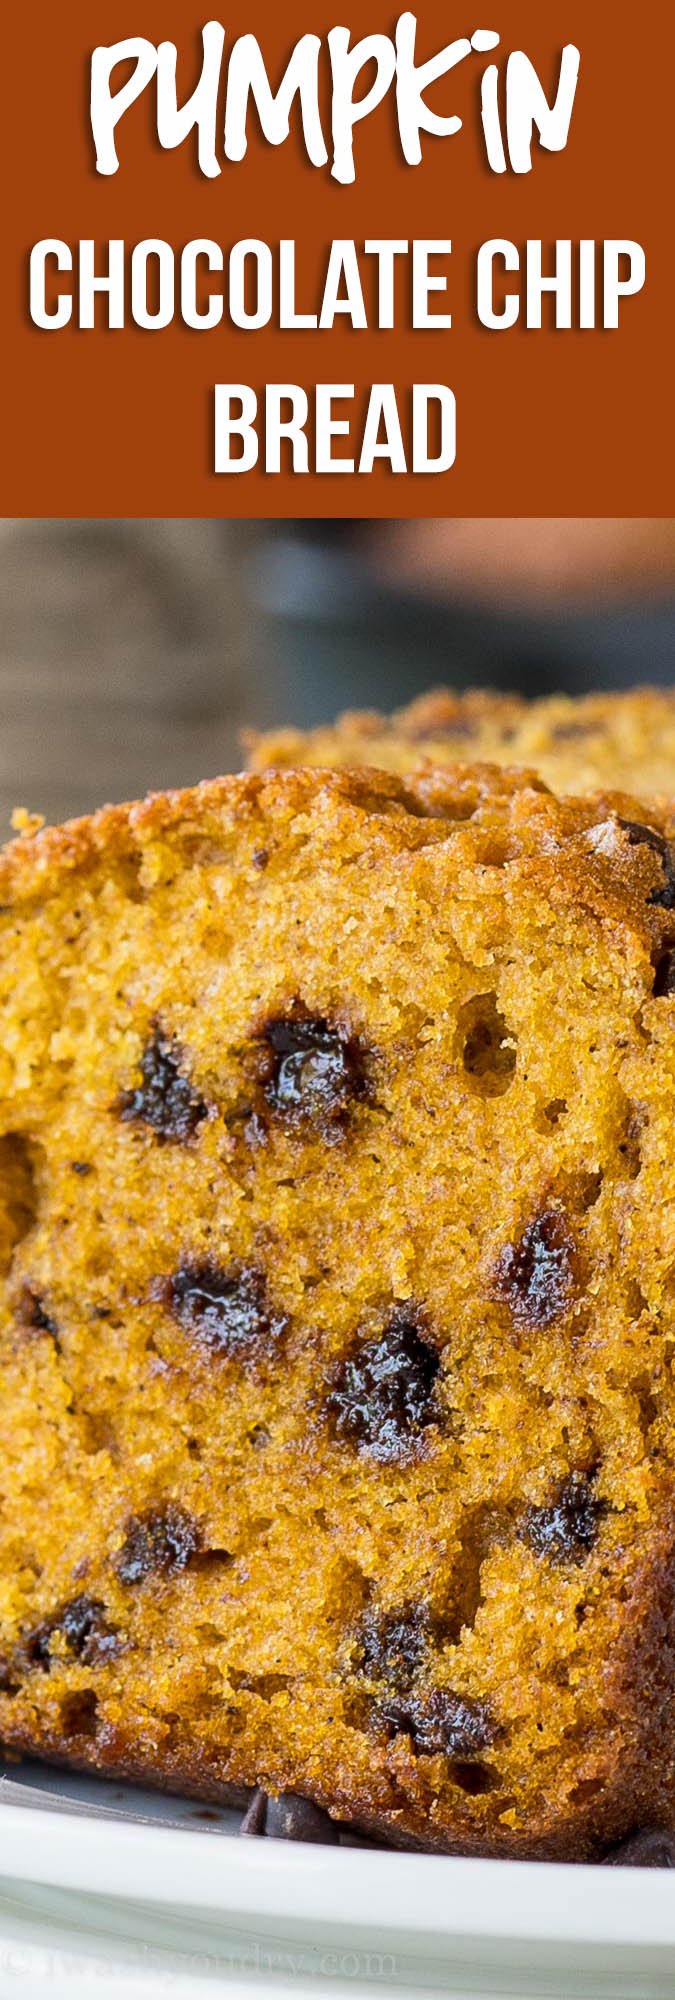 This Pumpkin Chocolate Chip Loaf makes for a perfect holiday gift! So moist and perfectly sweetened with that pumpkin pie spice!